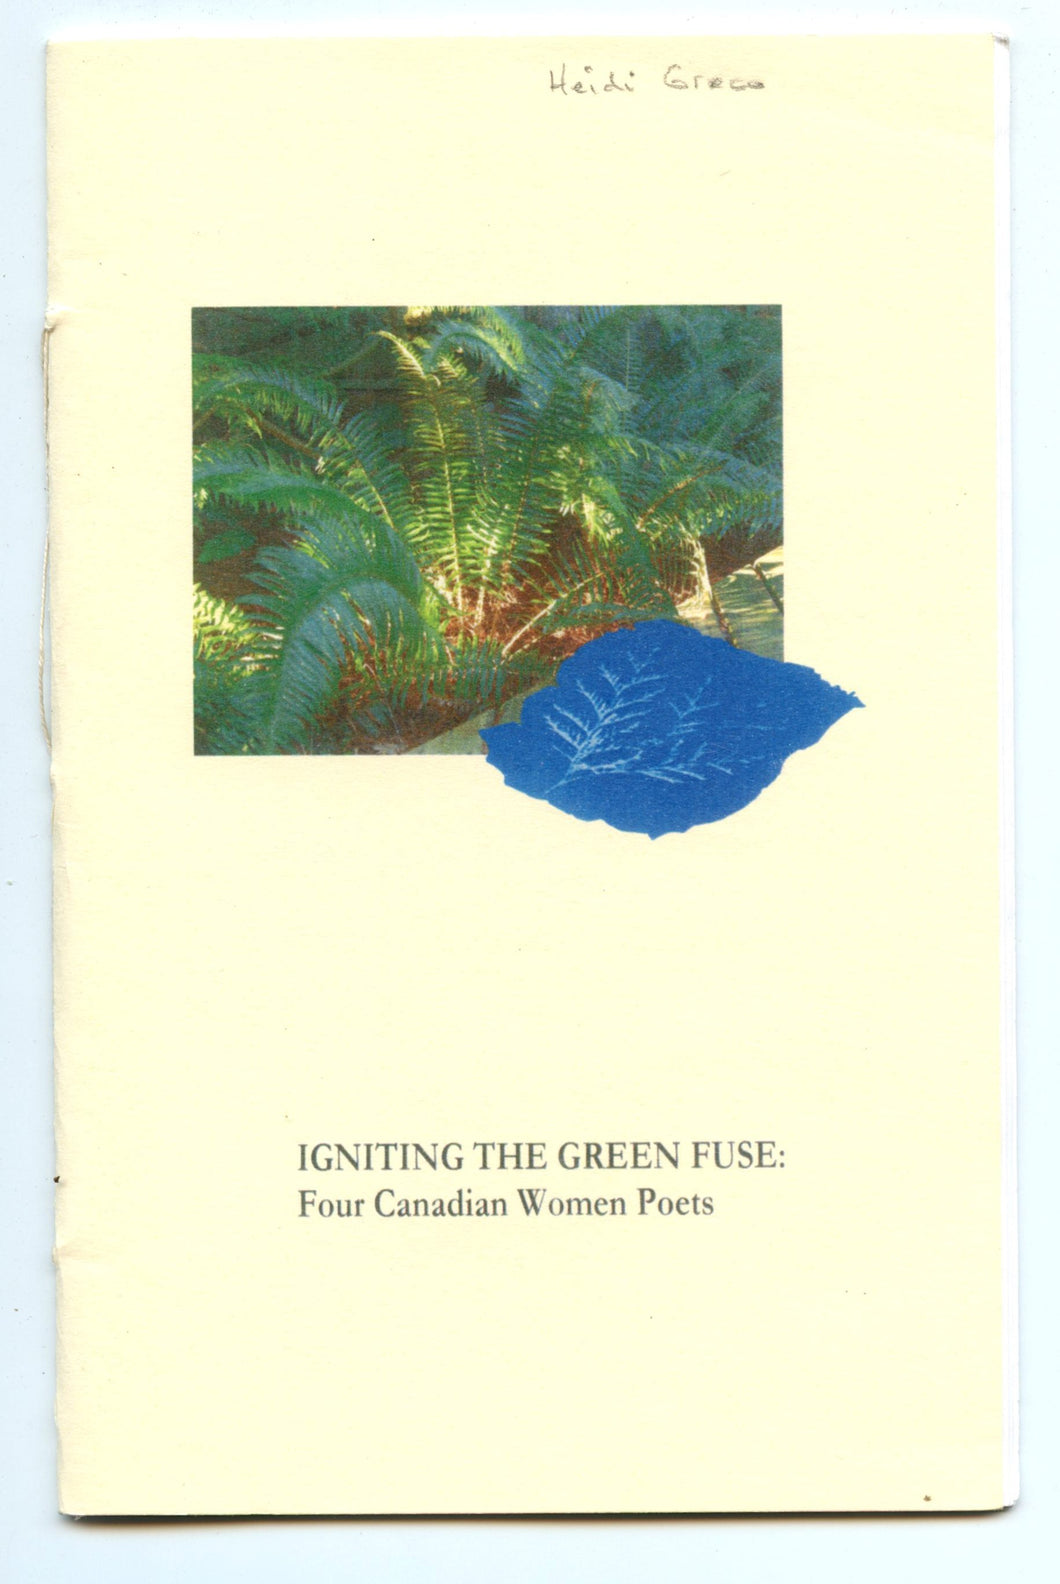 Igniting The Green Fuse: Four Canadian Women Poets